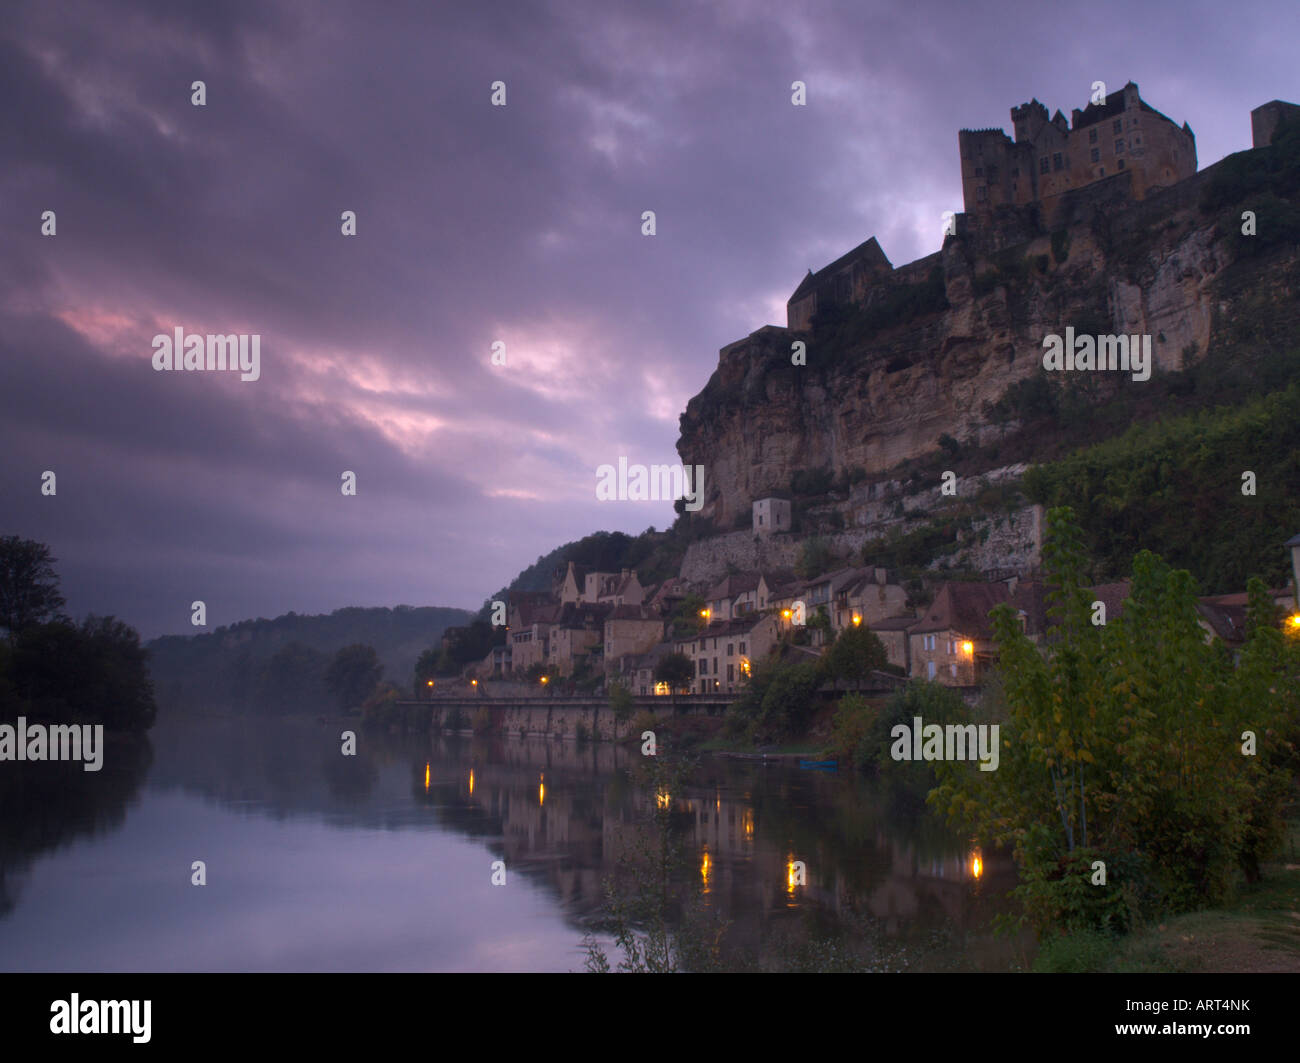 View of Beynac Castle and River Dordogne in Perigord, France at sunset Stock Photo